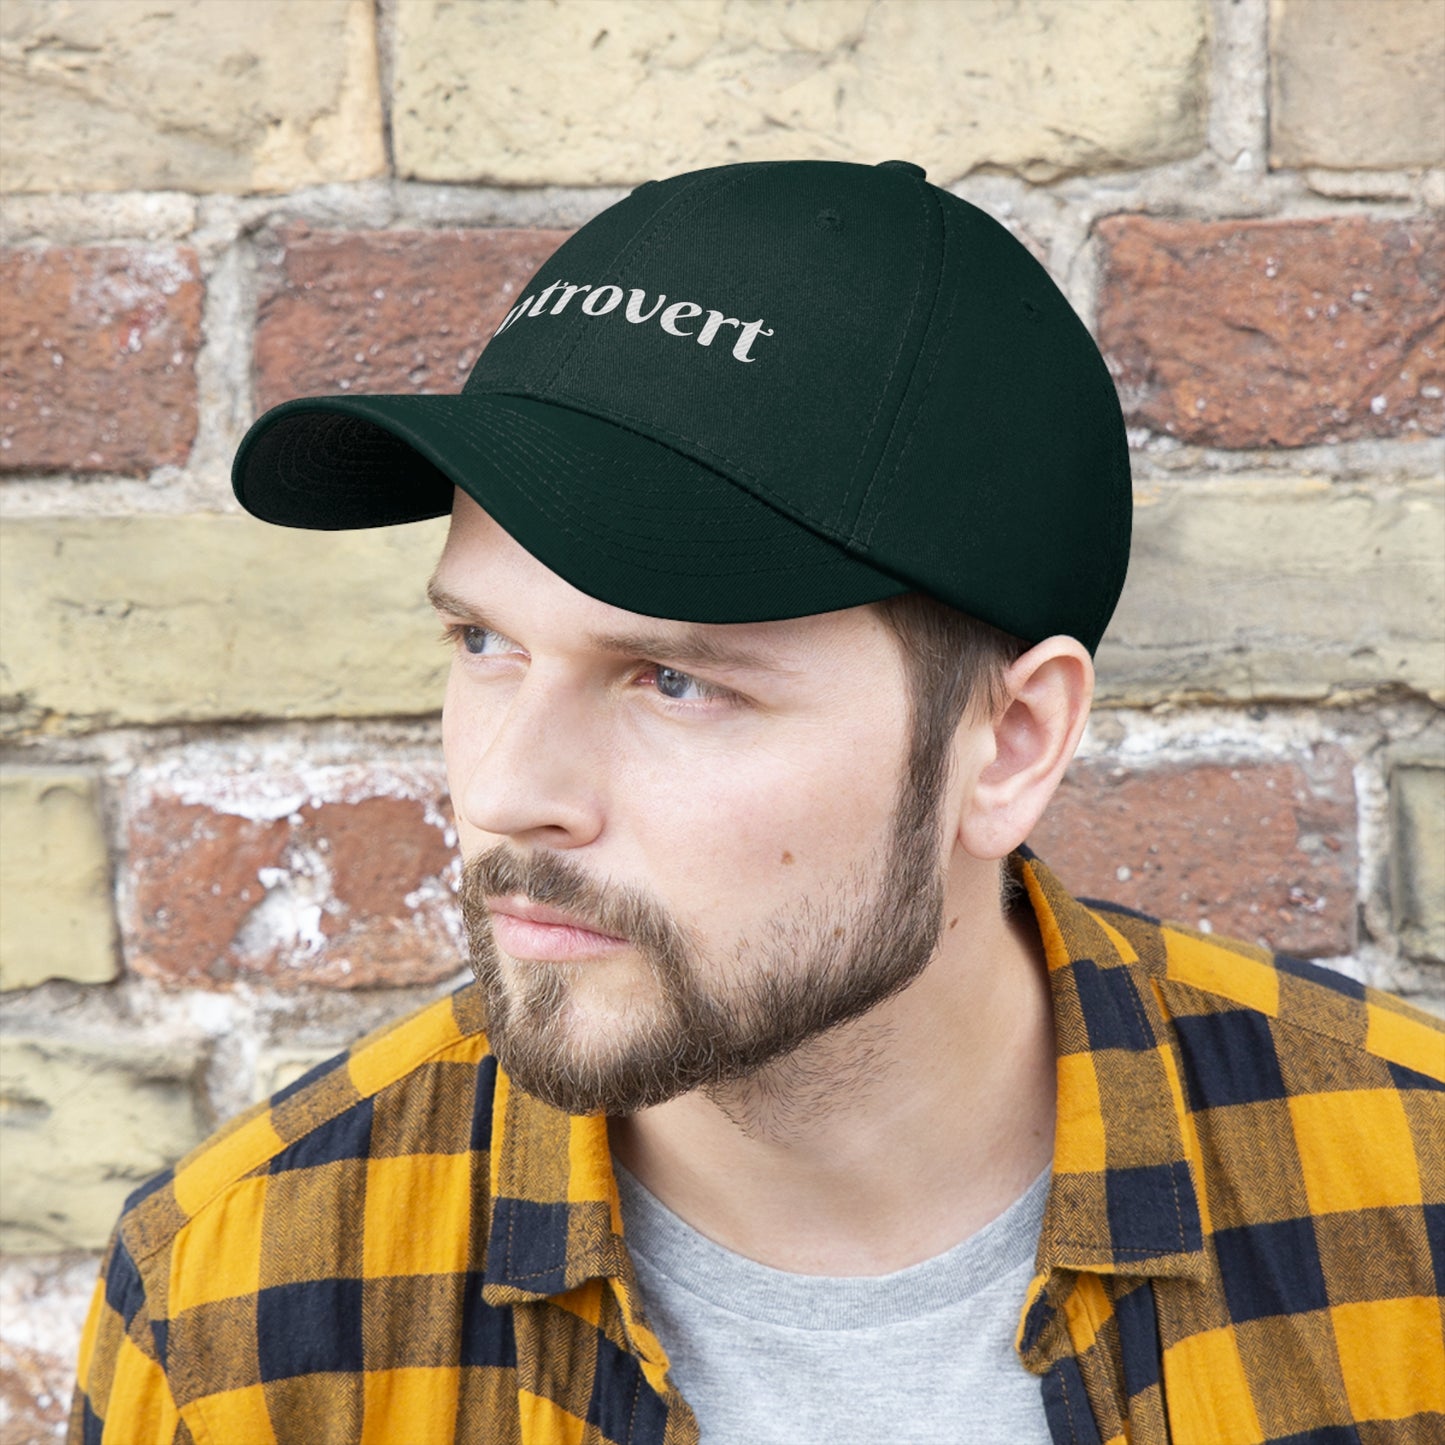 Introvert Embroidered Hat